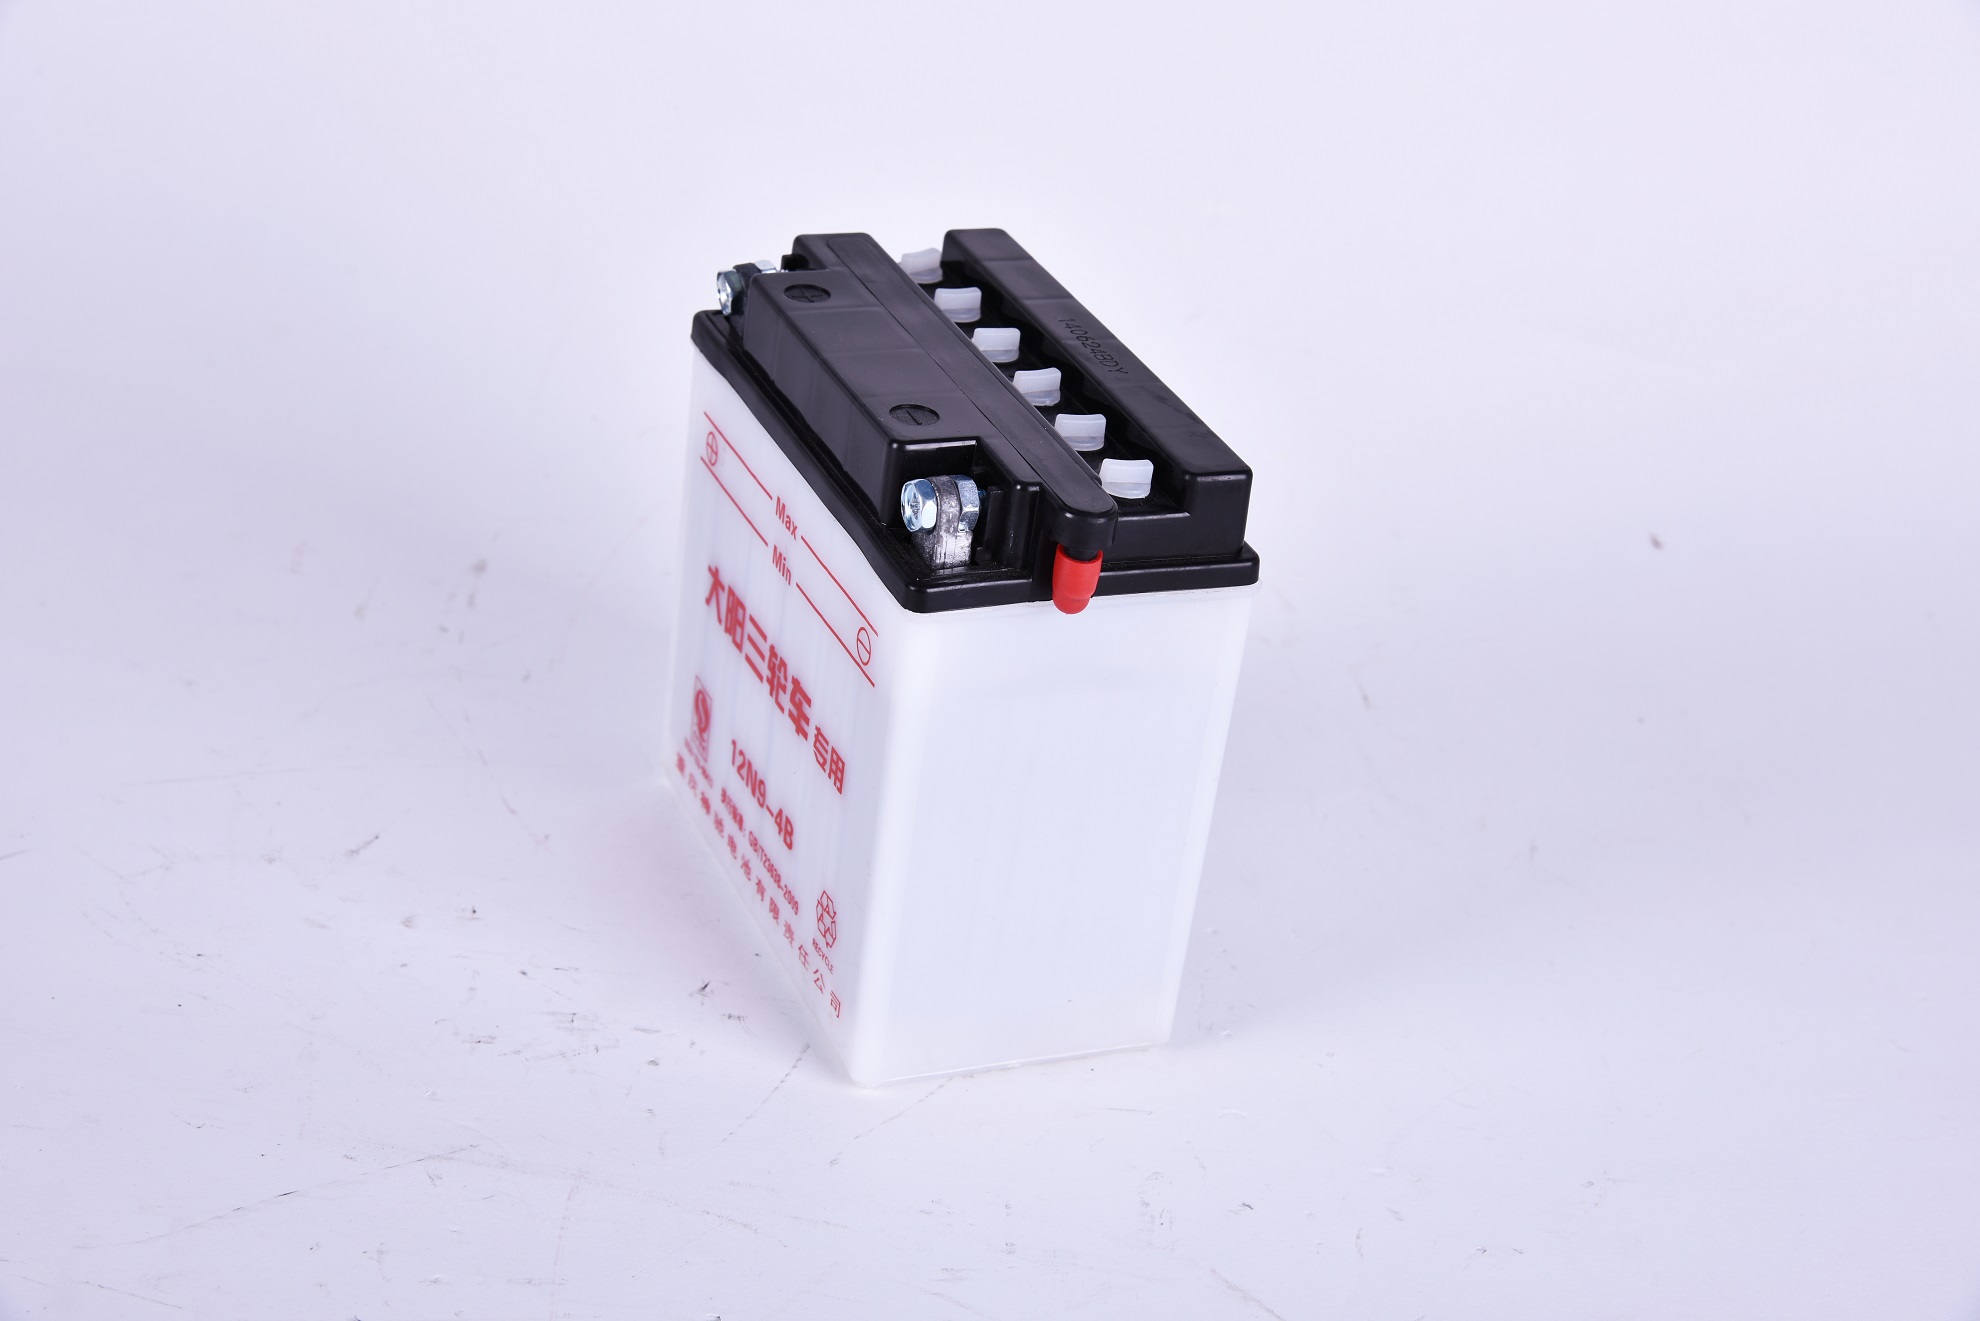 Removable 12V 9Ah Motorcycle Battery